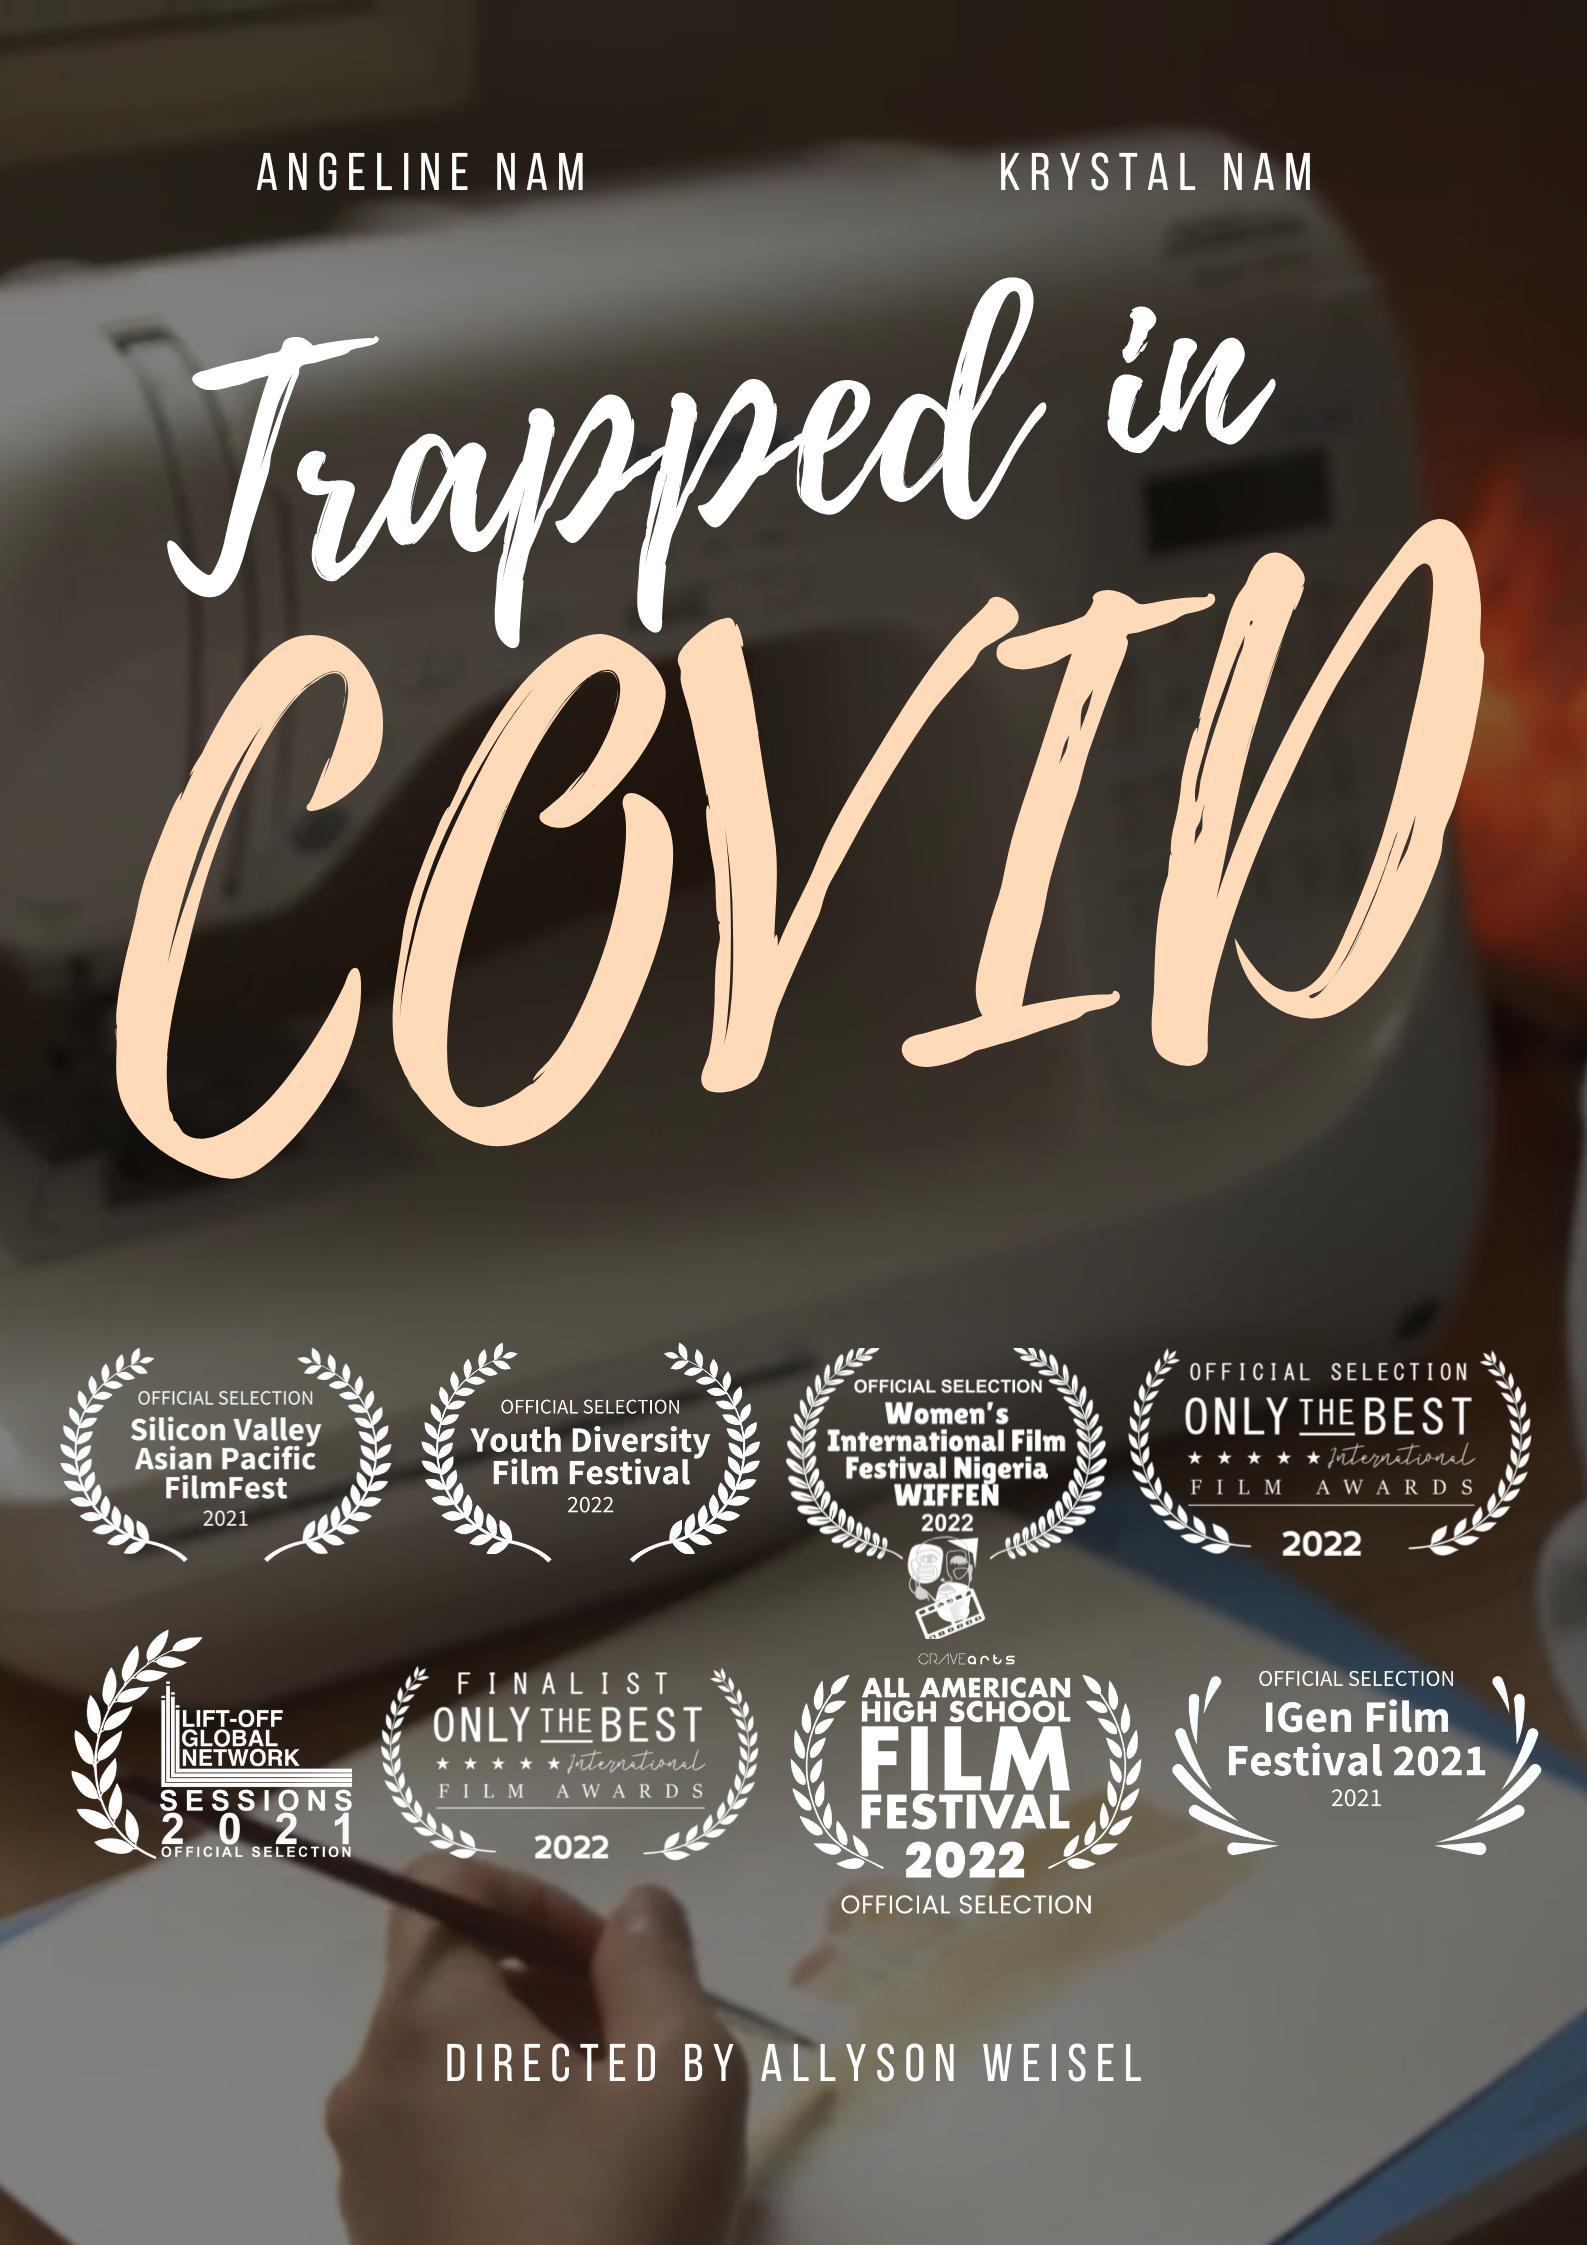 Trapped in Covid - The Story of Angeline and Krystal Nam